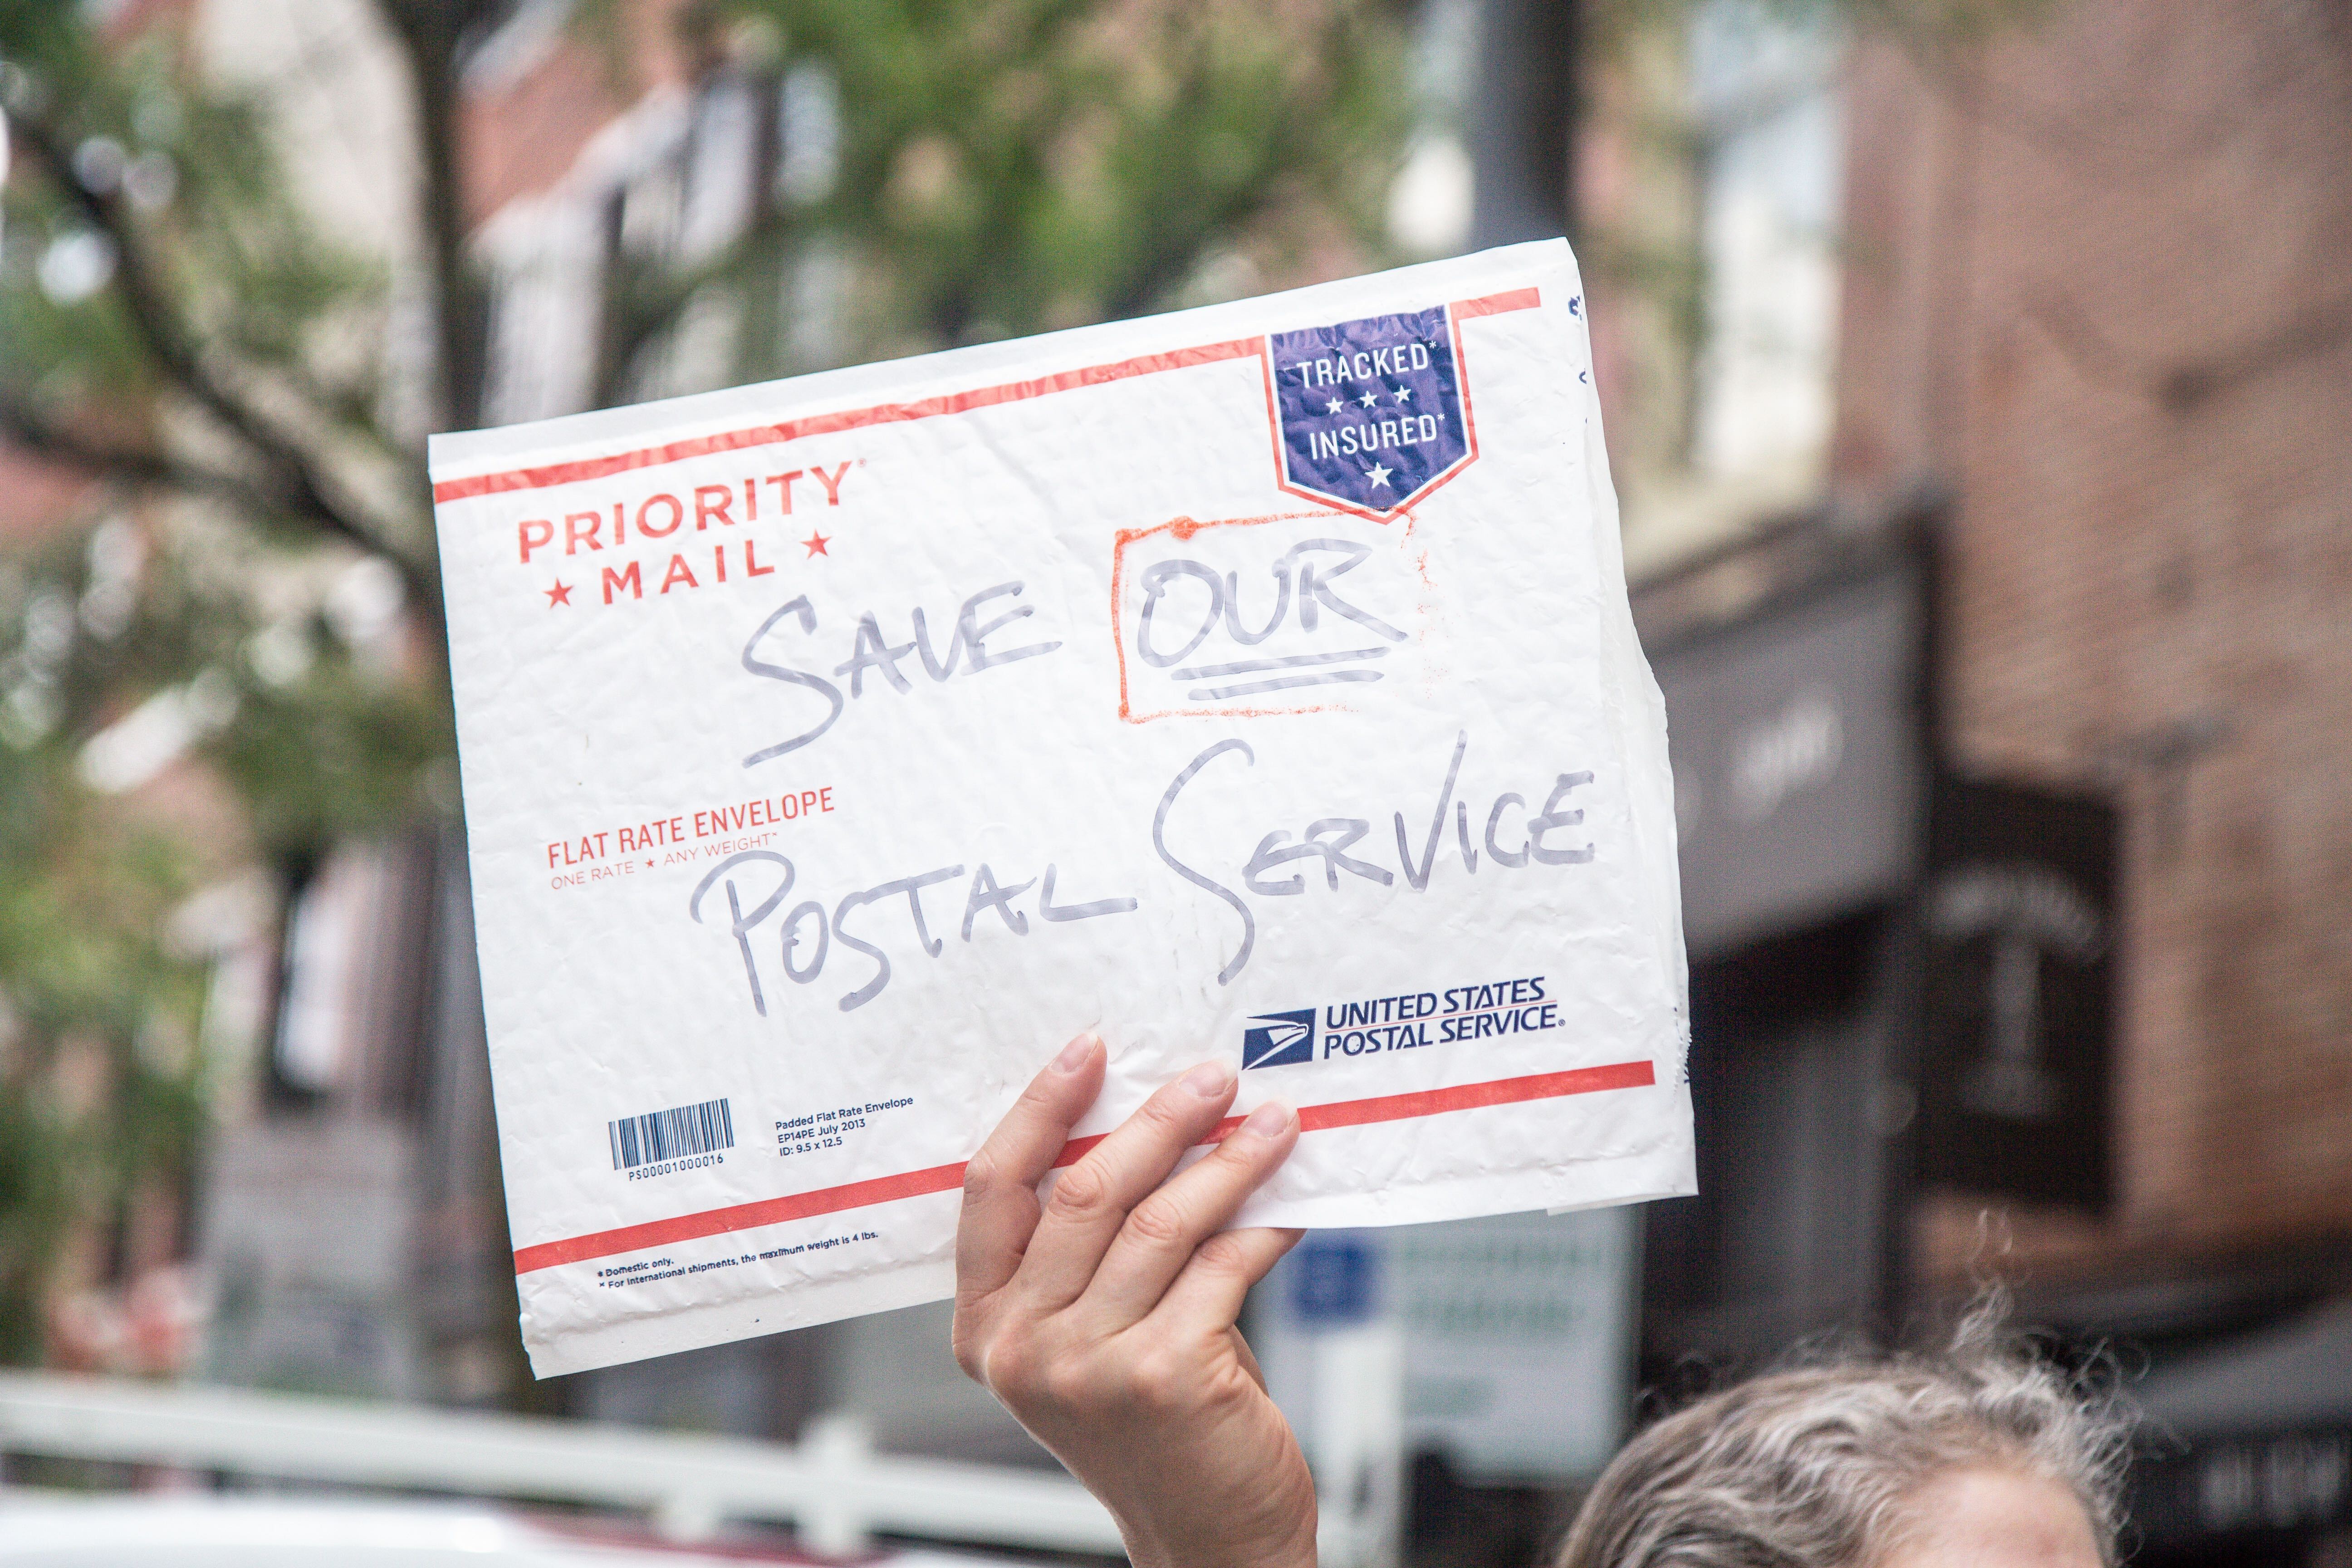 Mail delays likely as new Postal Service boss pushes costcutting WHYY